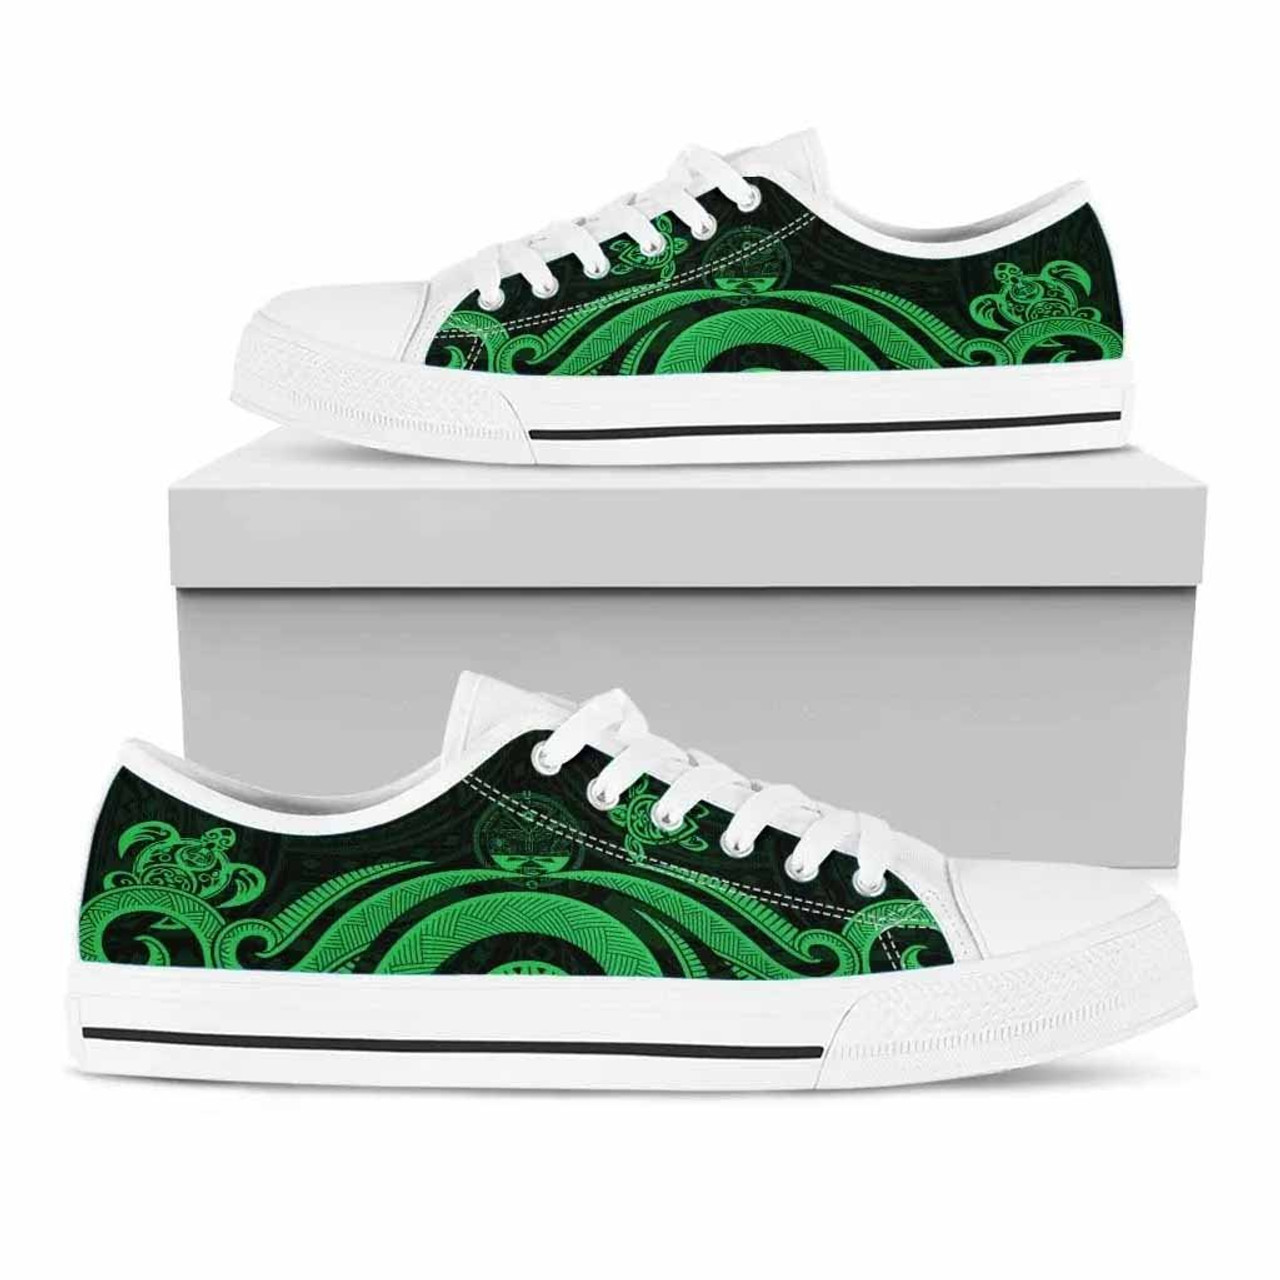 Marshall Islands Low Top Canvas Shoes - Green Tentacle Turtle Crest 5